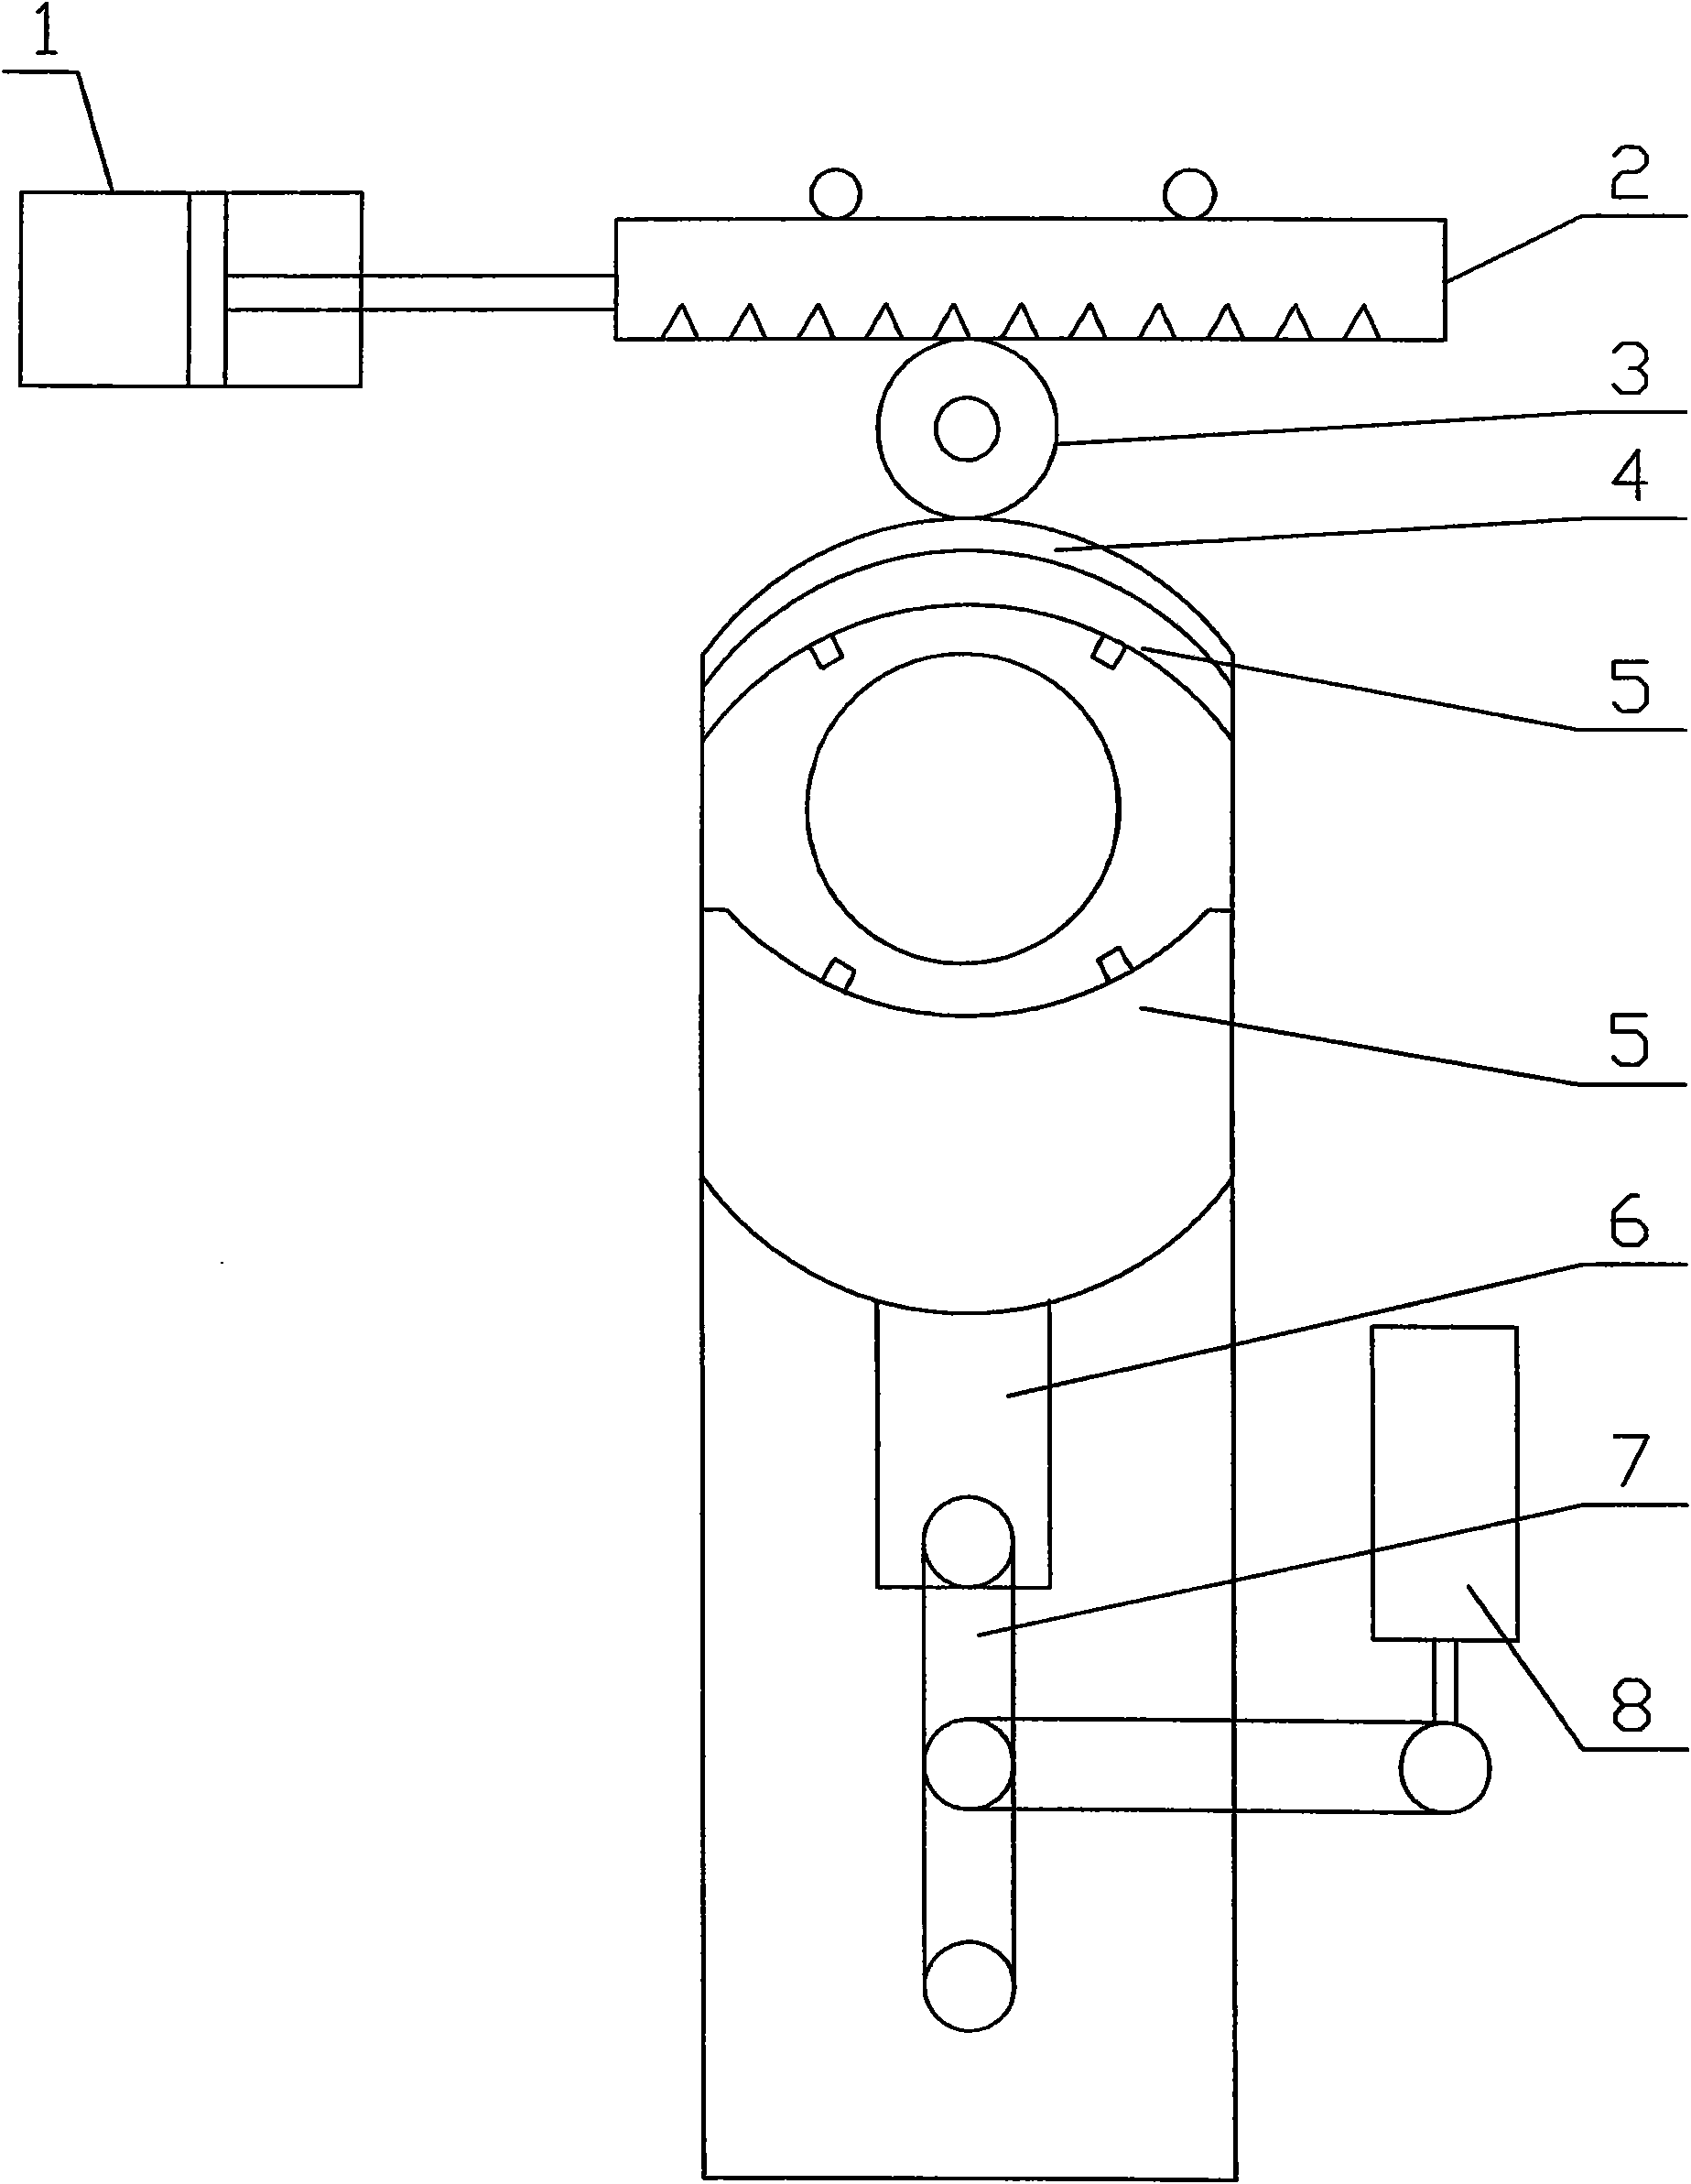 Unclamping device on drilling rod joint